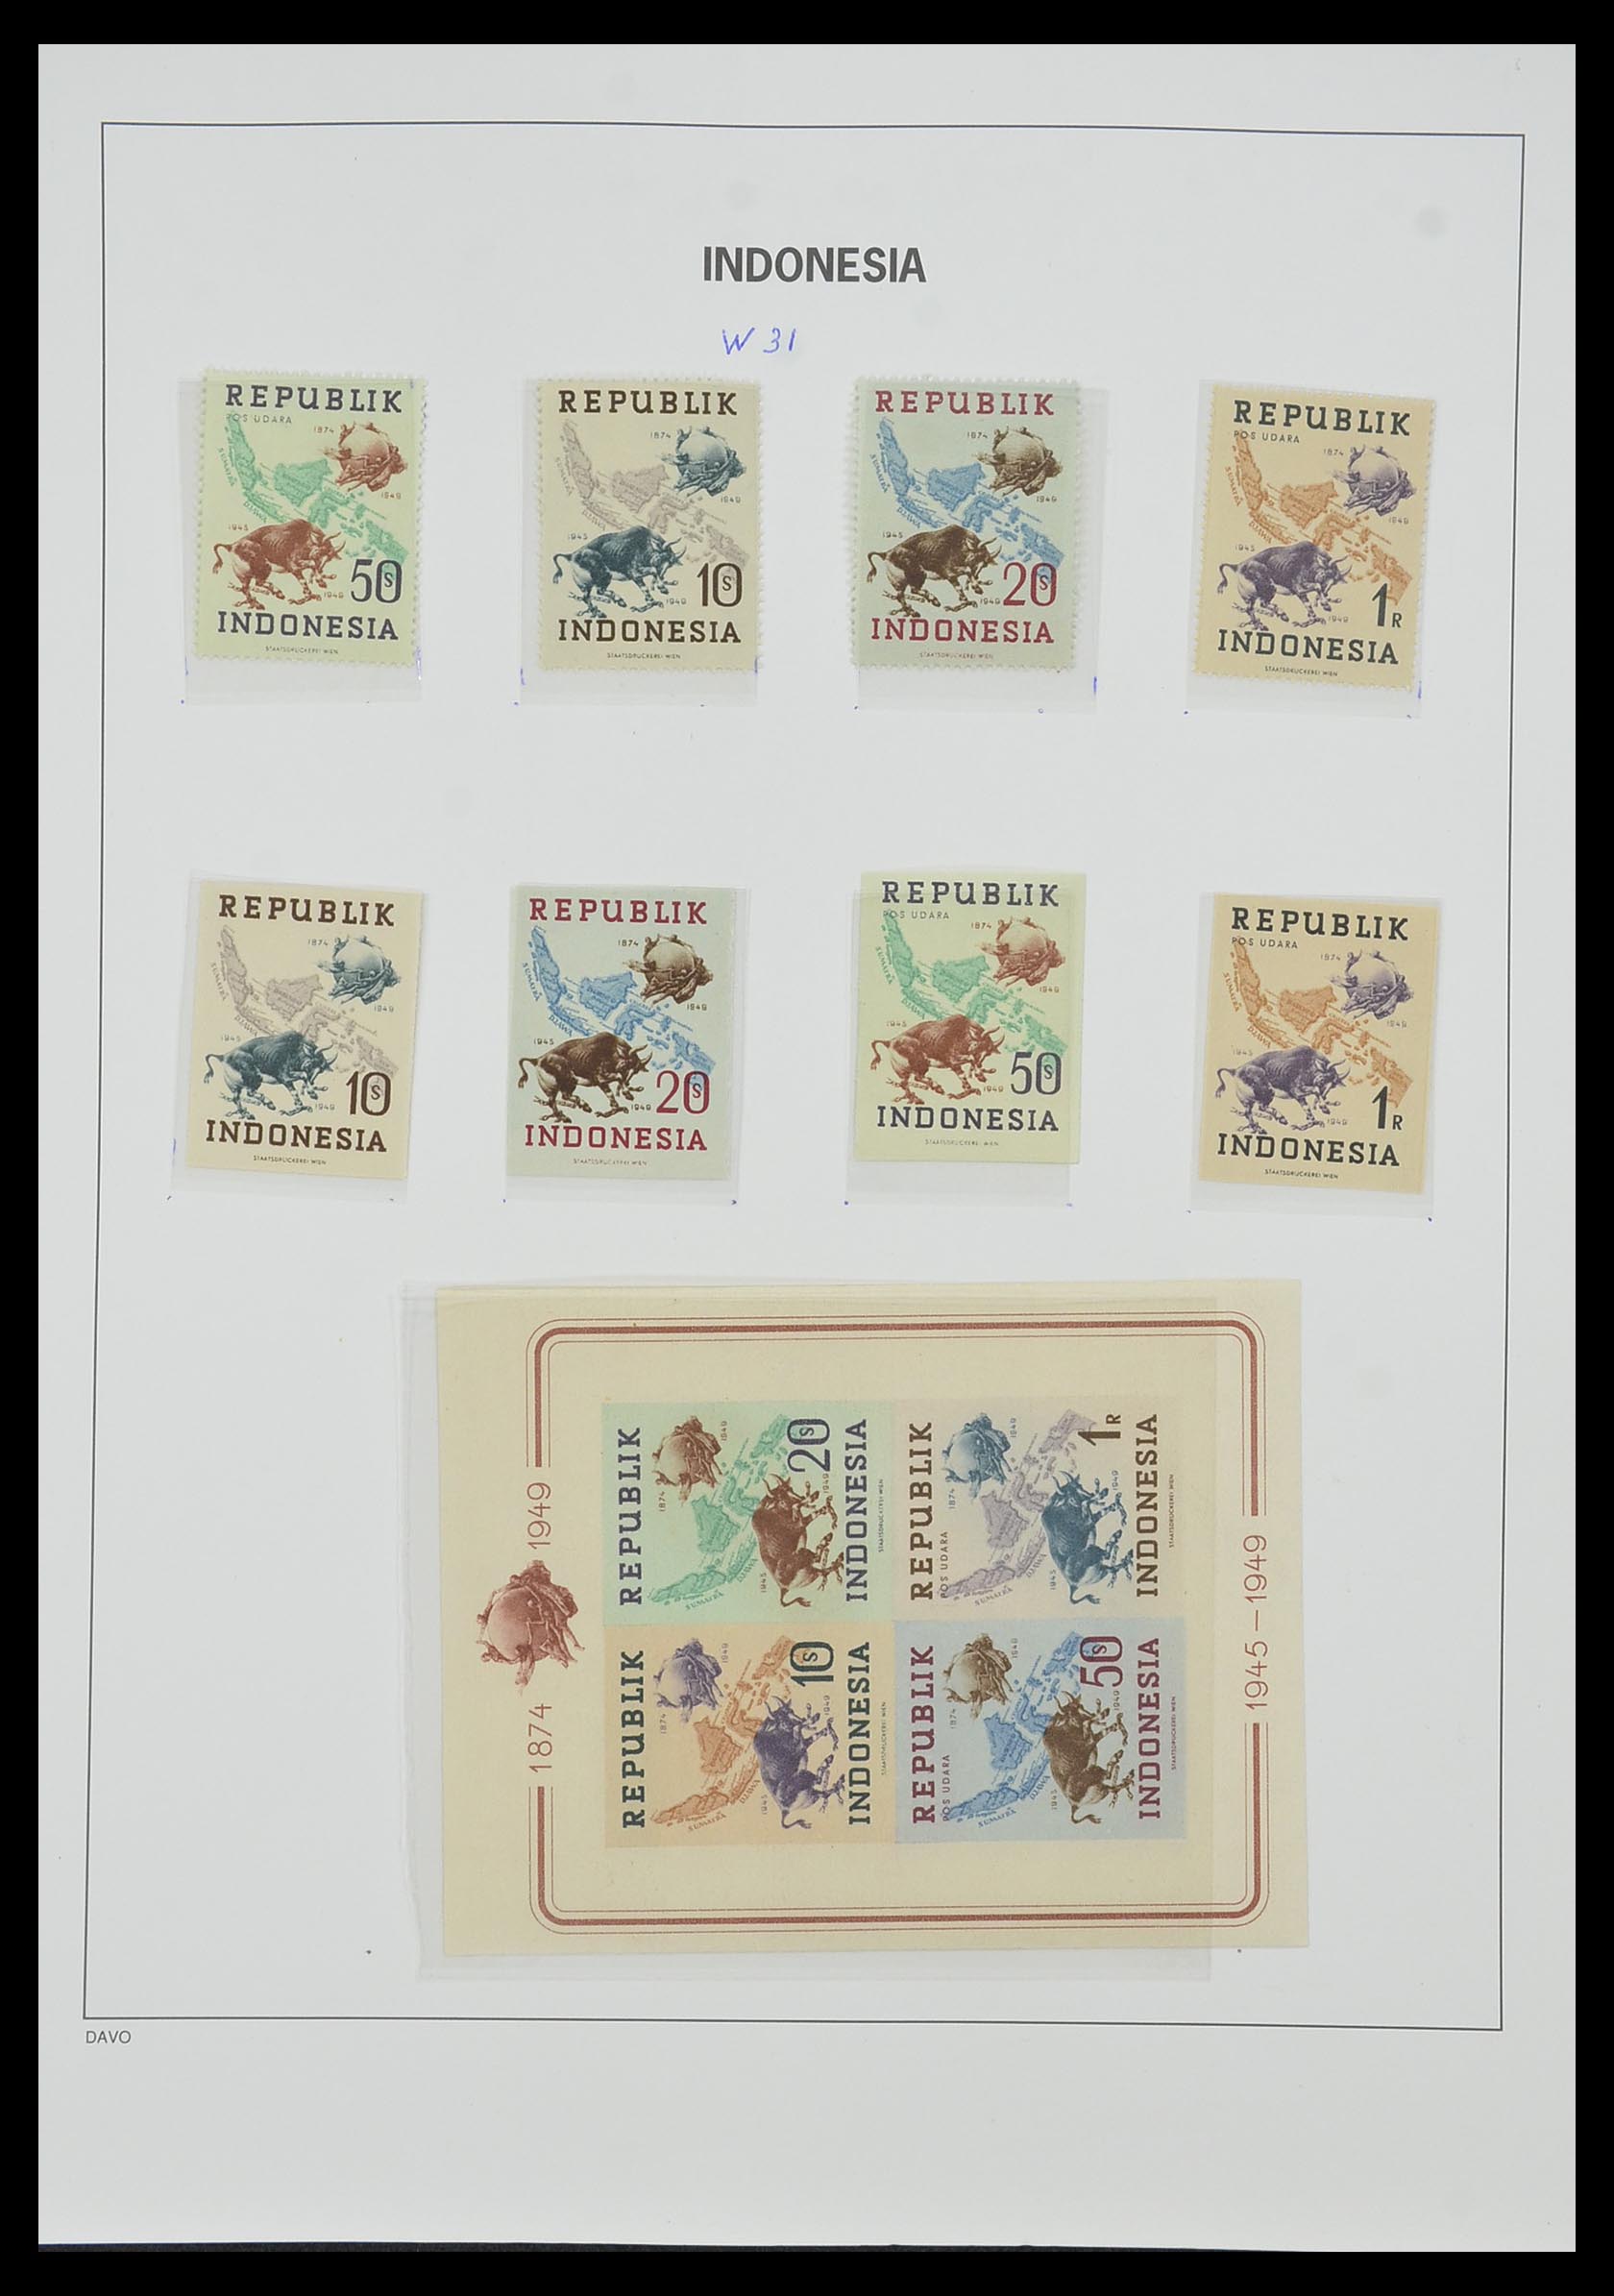 33988 045 - Stamp collection 33988 Vienna printings Indonesia.